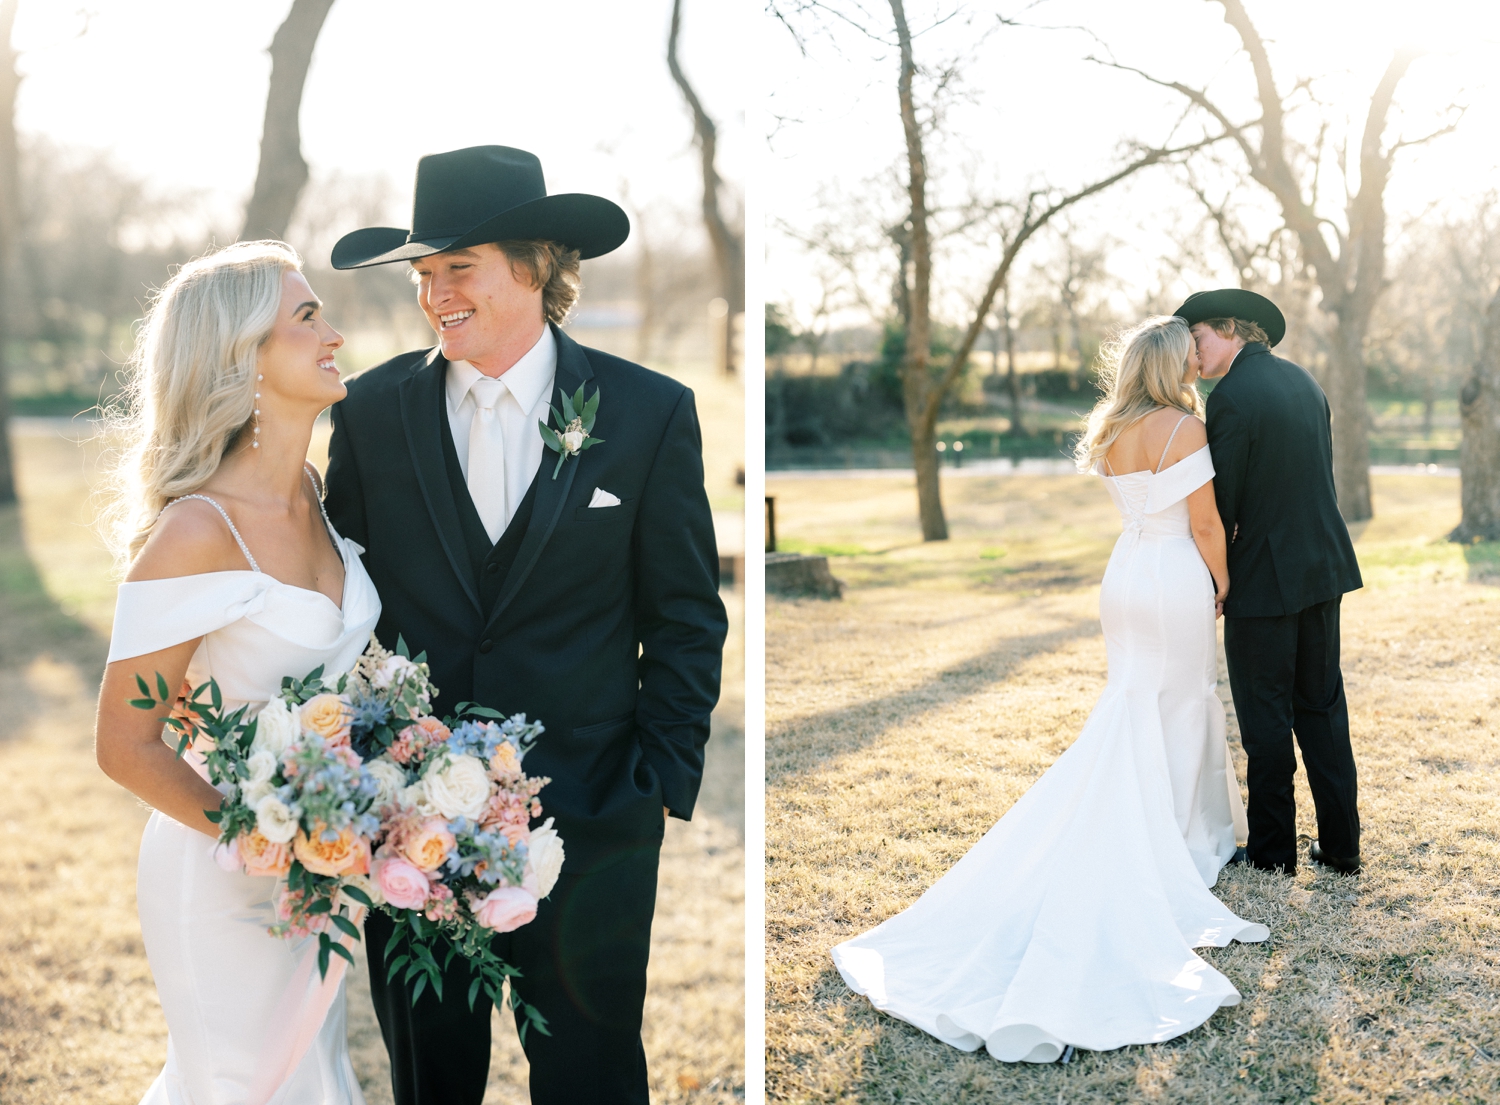 Bride and Groom Portraits on Wedding Day with Groom in Black Cowboy Hat | Reiley and Rose | Central Texas Floral Designer | Luling, TX Wedding | Western Wedding, pastel wedding, Cinderella wedding inspo, ideas for beauty and the beast wedding | via reileyandrose.com